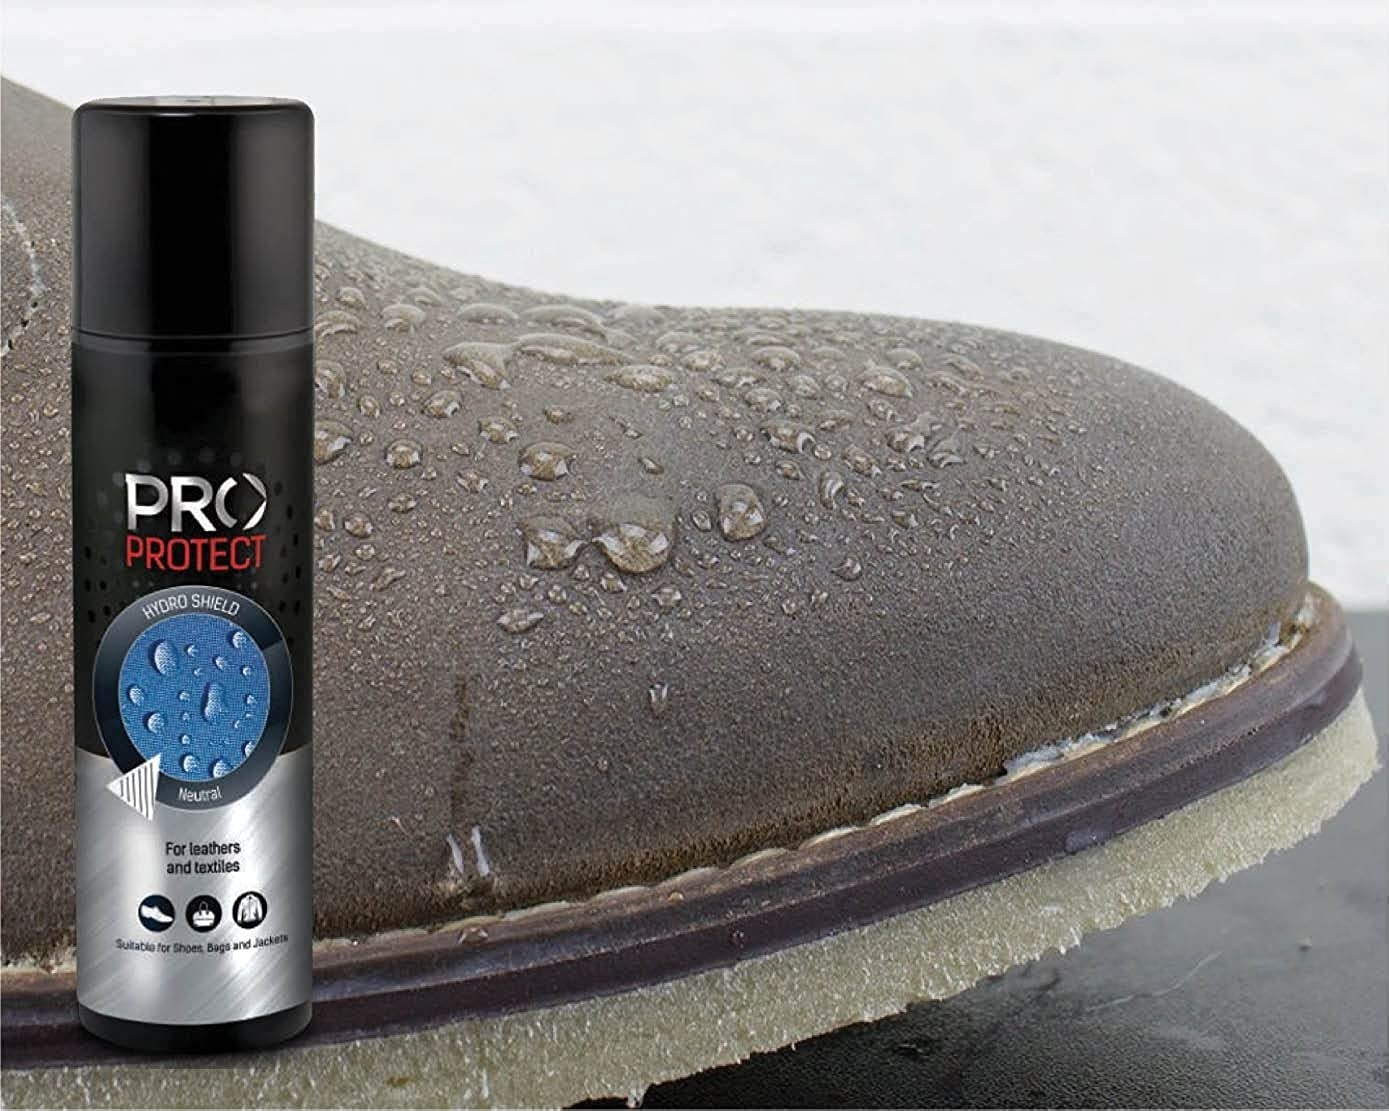 A water protection spray next to a shoe with water droplets on it